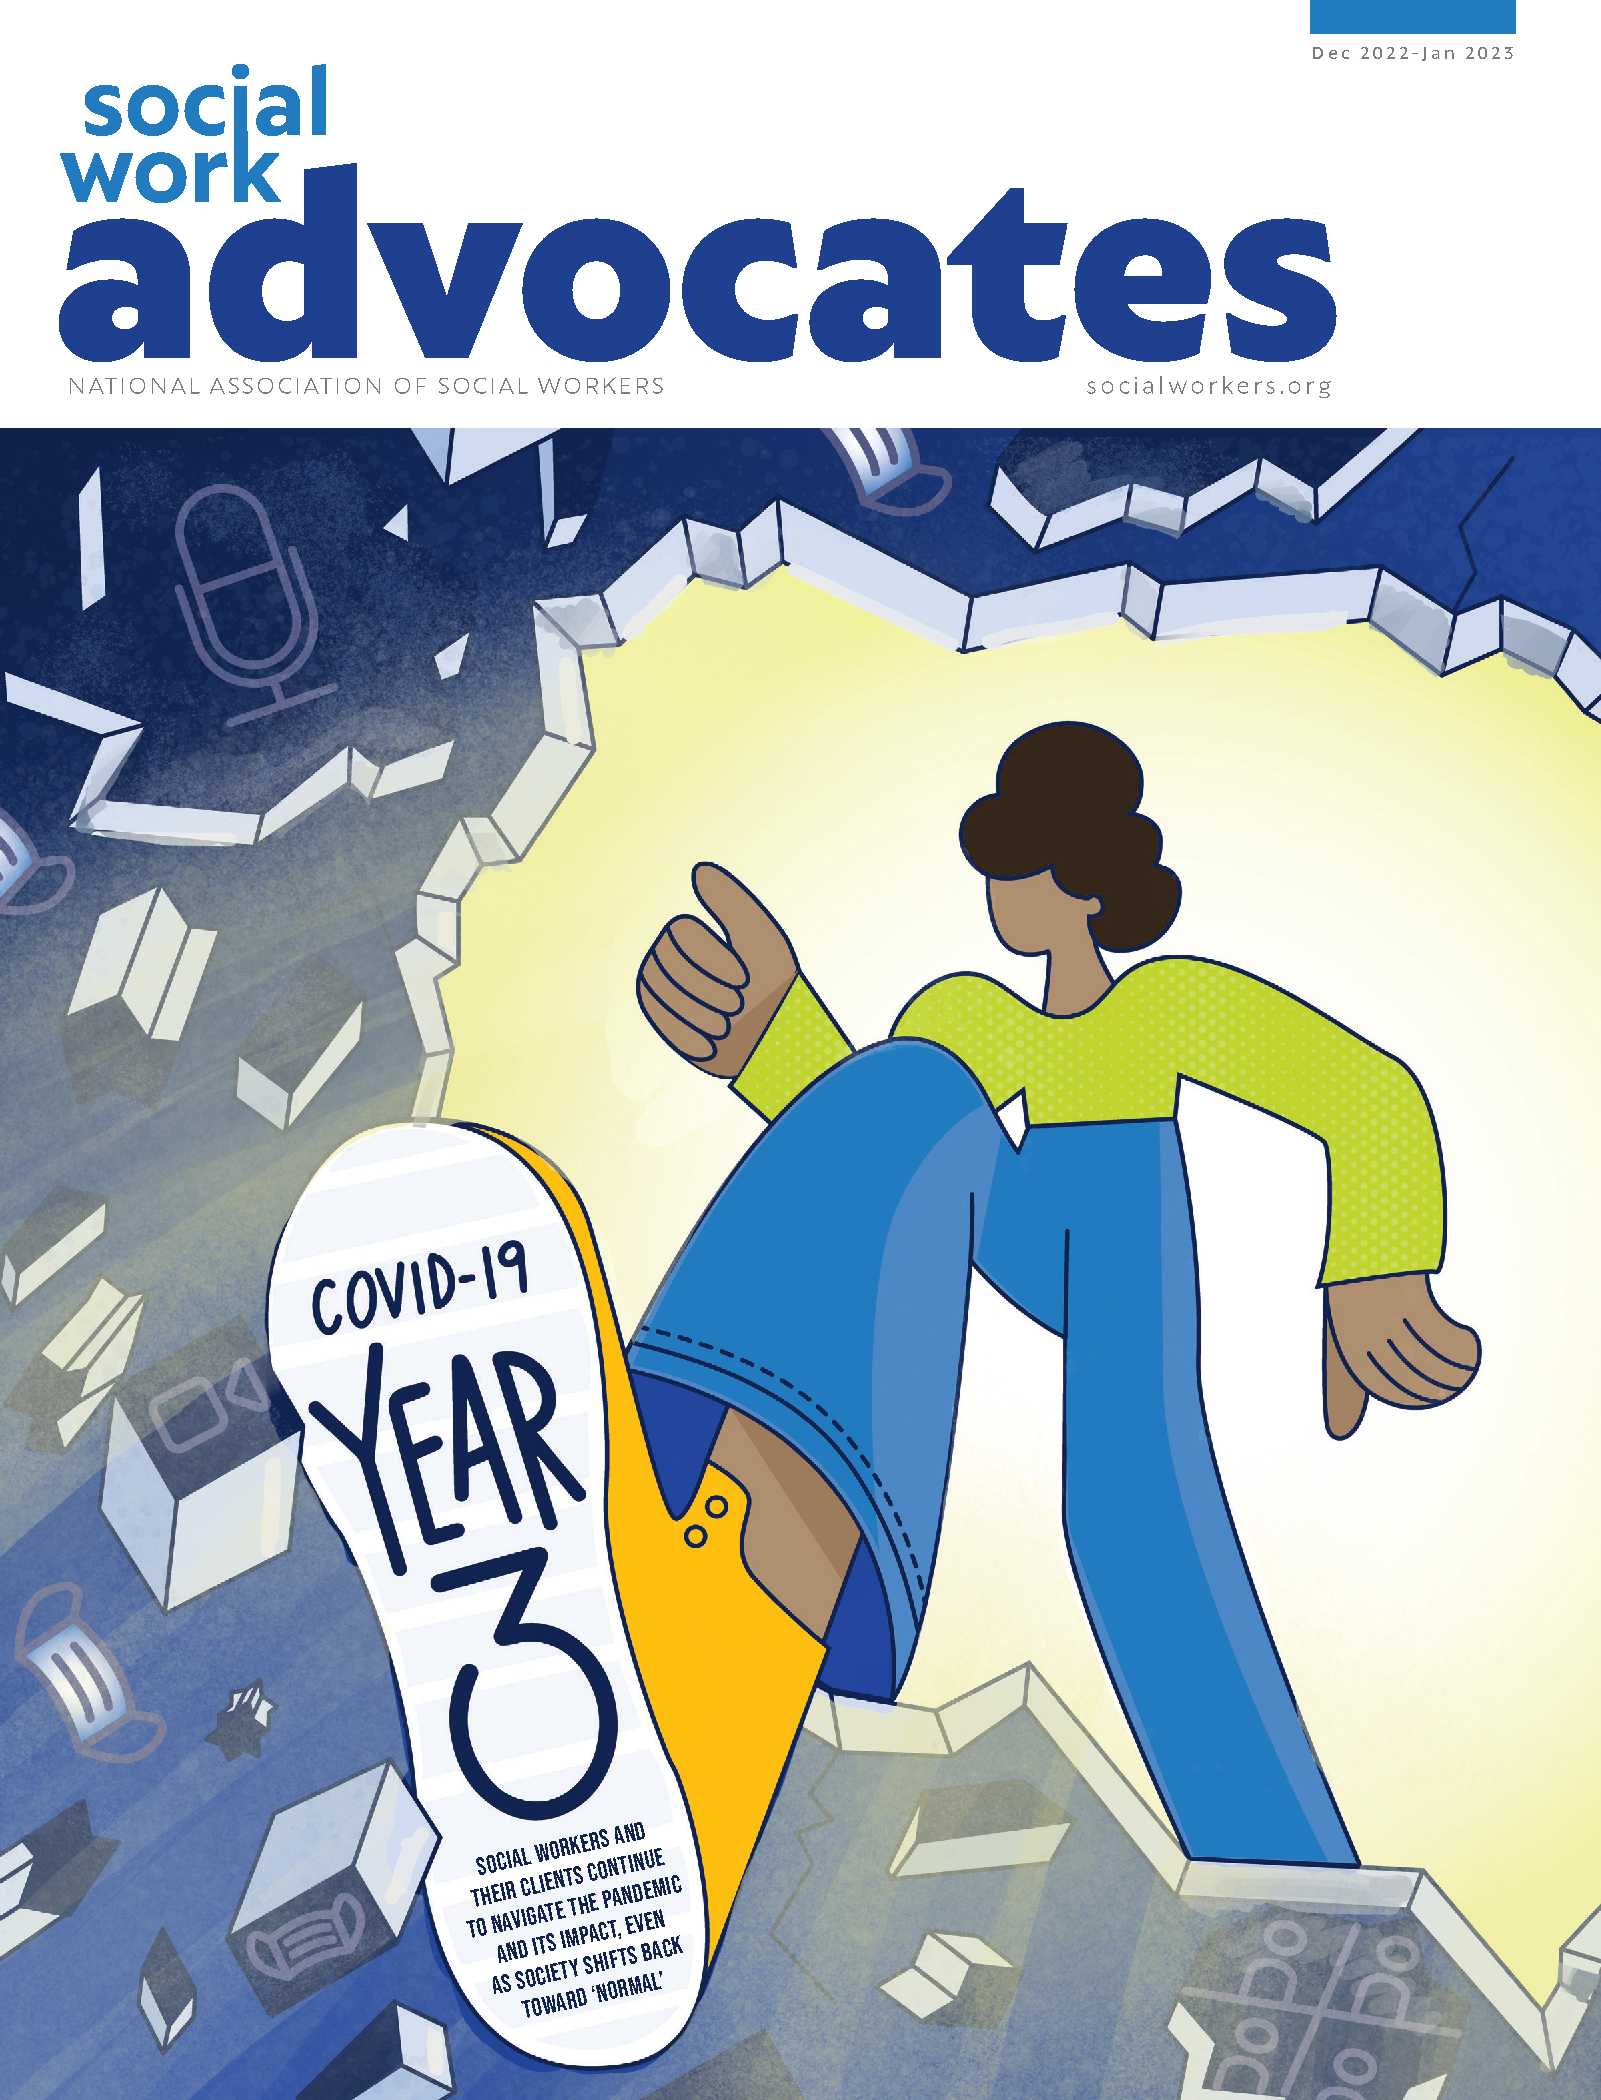 Social Work Advocates December 2022 – January 2023 Issue is Online